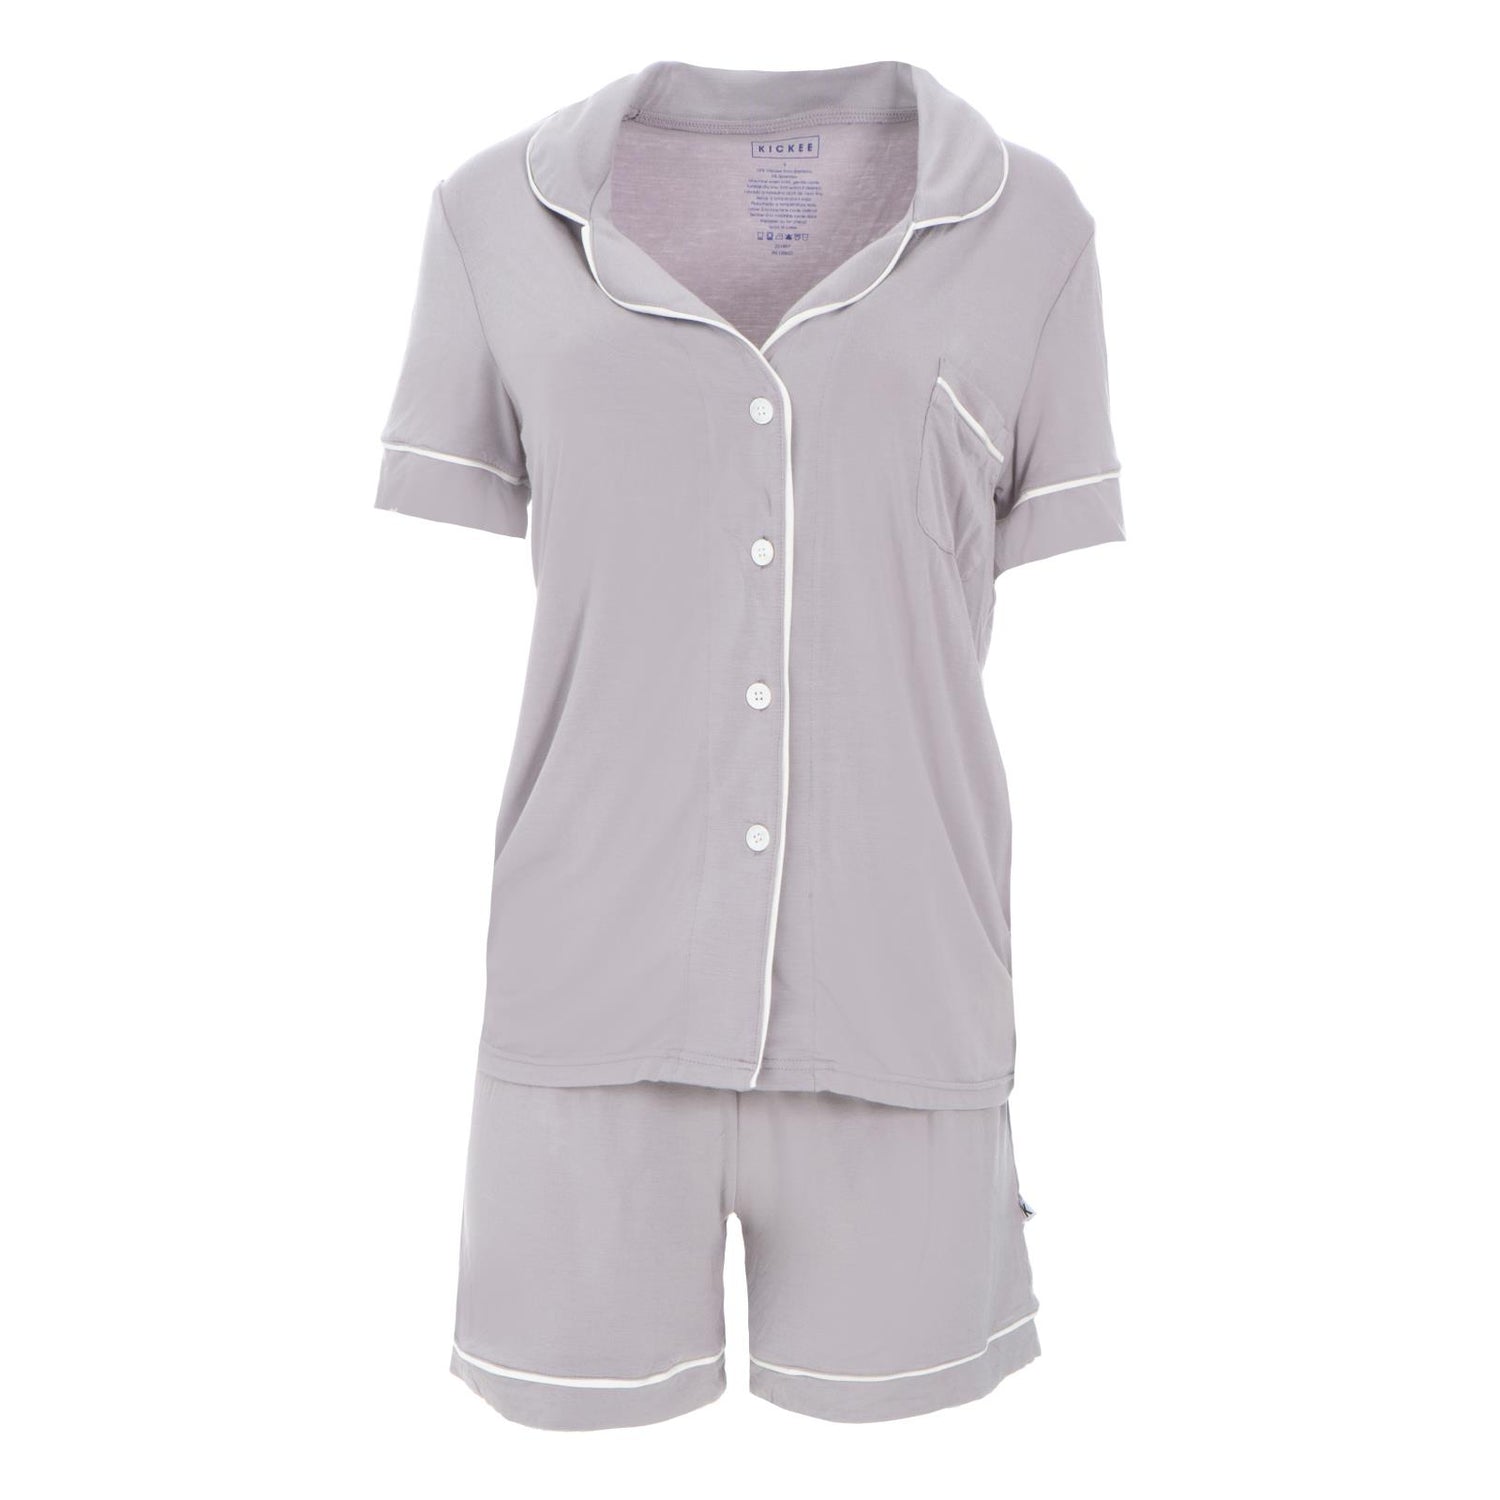 Women's Short Sleeve Collared Pajama Set with Shorts in Feather with Natural